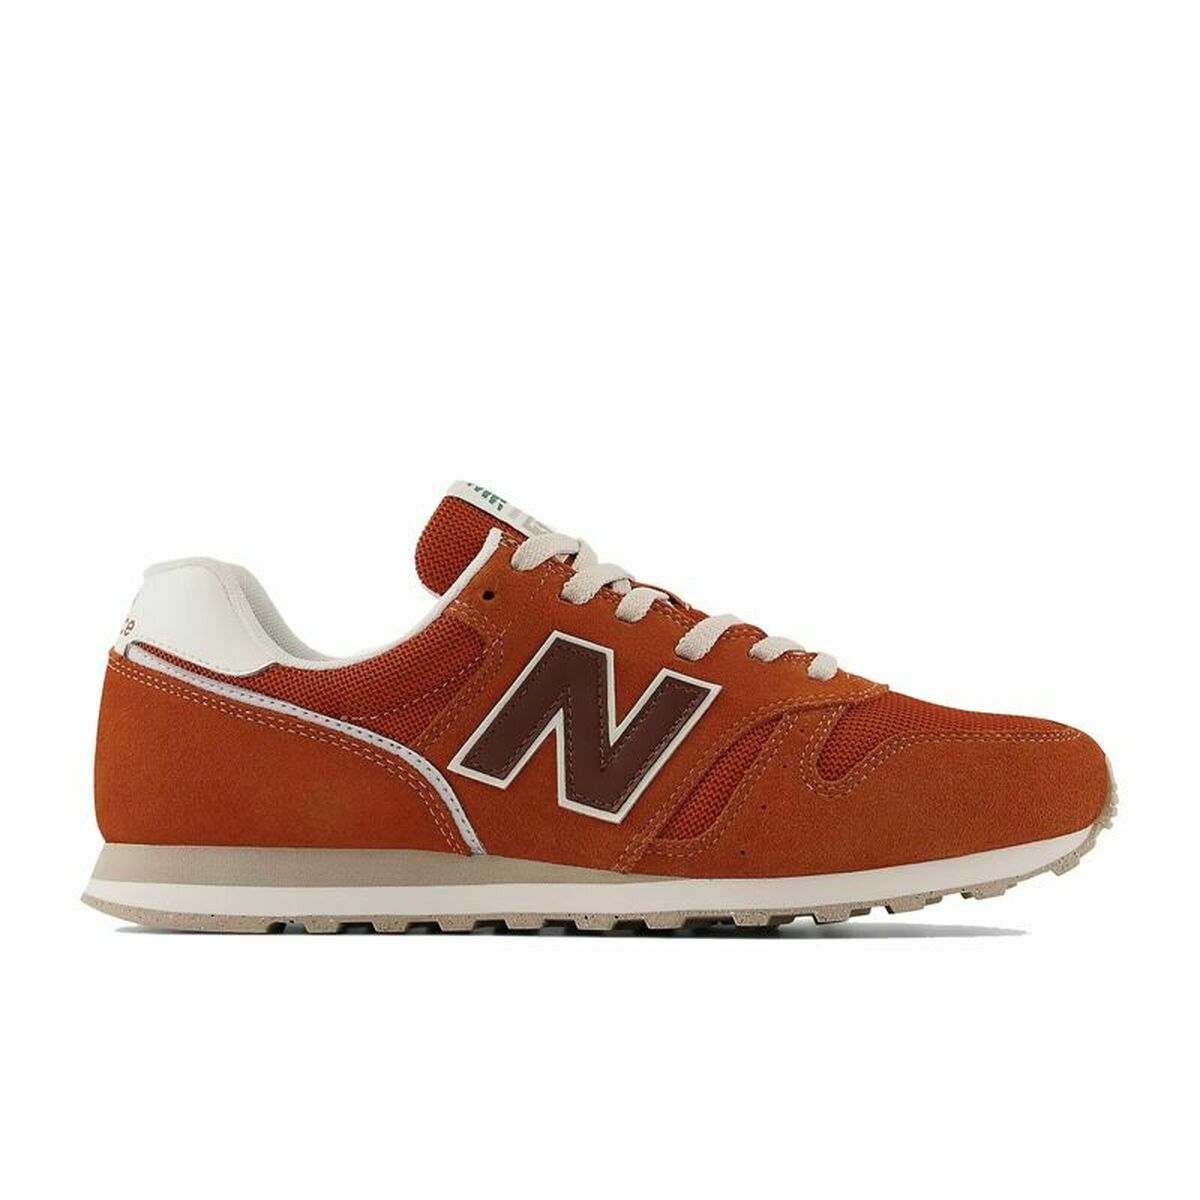 Chaussures casual homme New Balance 373 V2 Orange